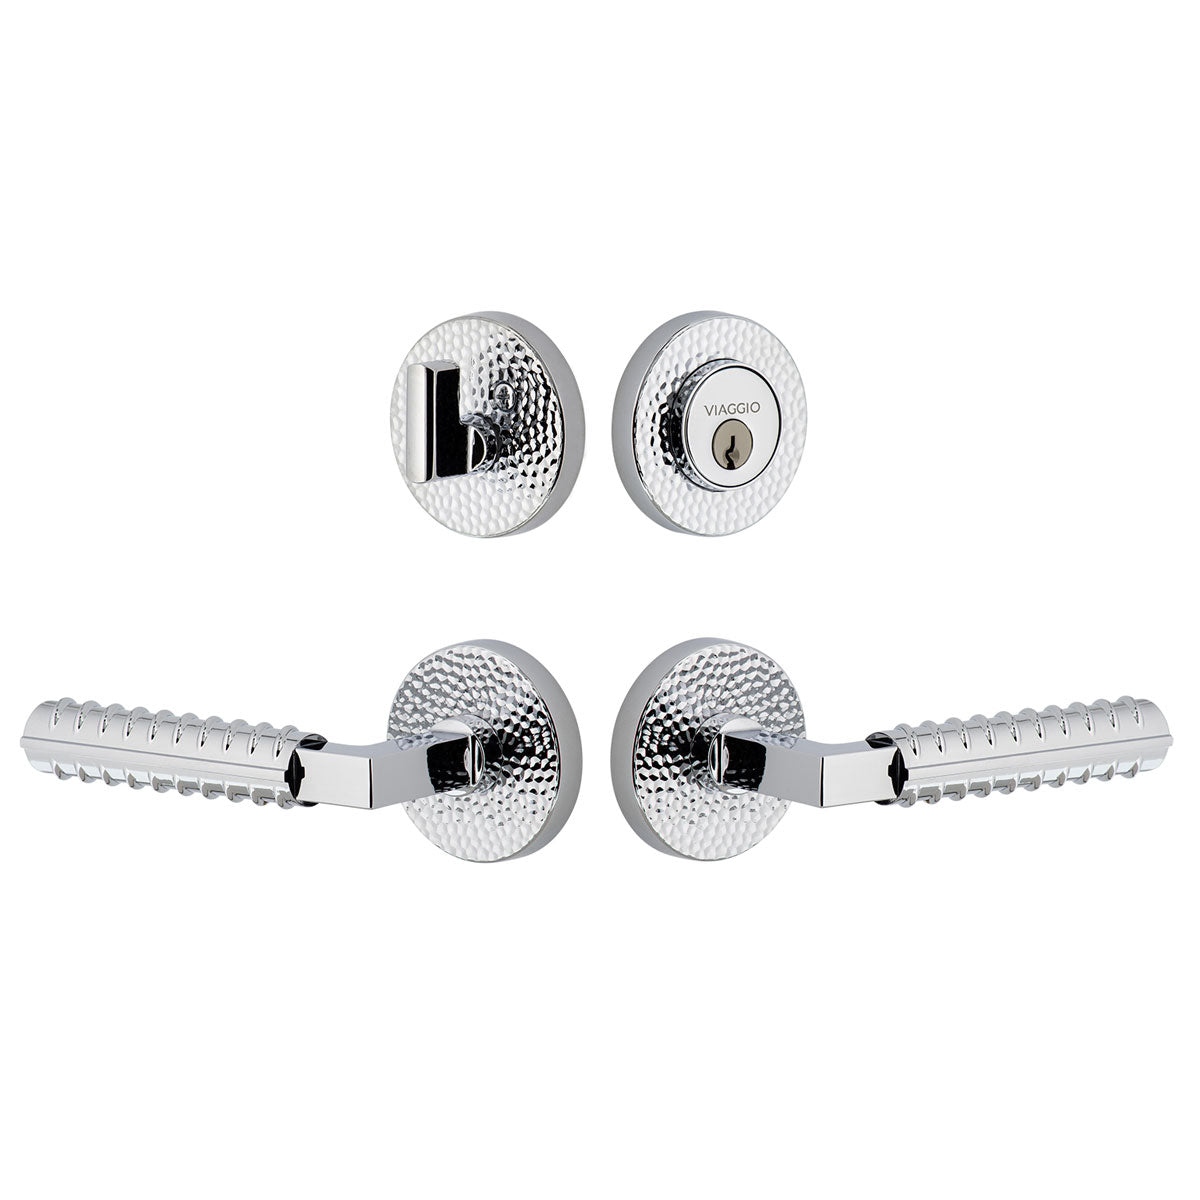 Circolo Hammered Rosette Entry Set with Contempo Rebar Lever in Bright Chrome